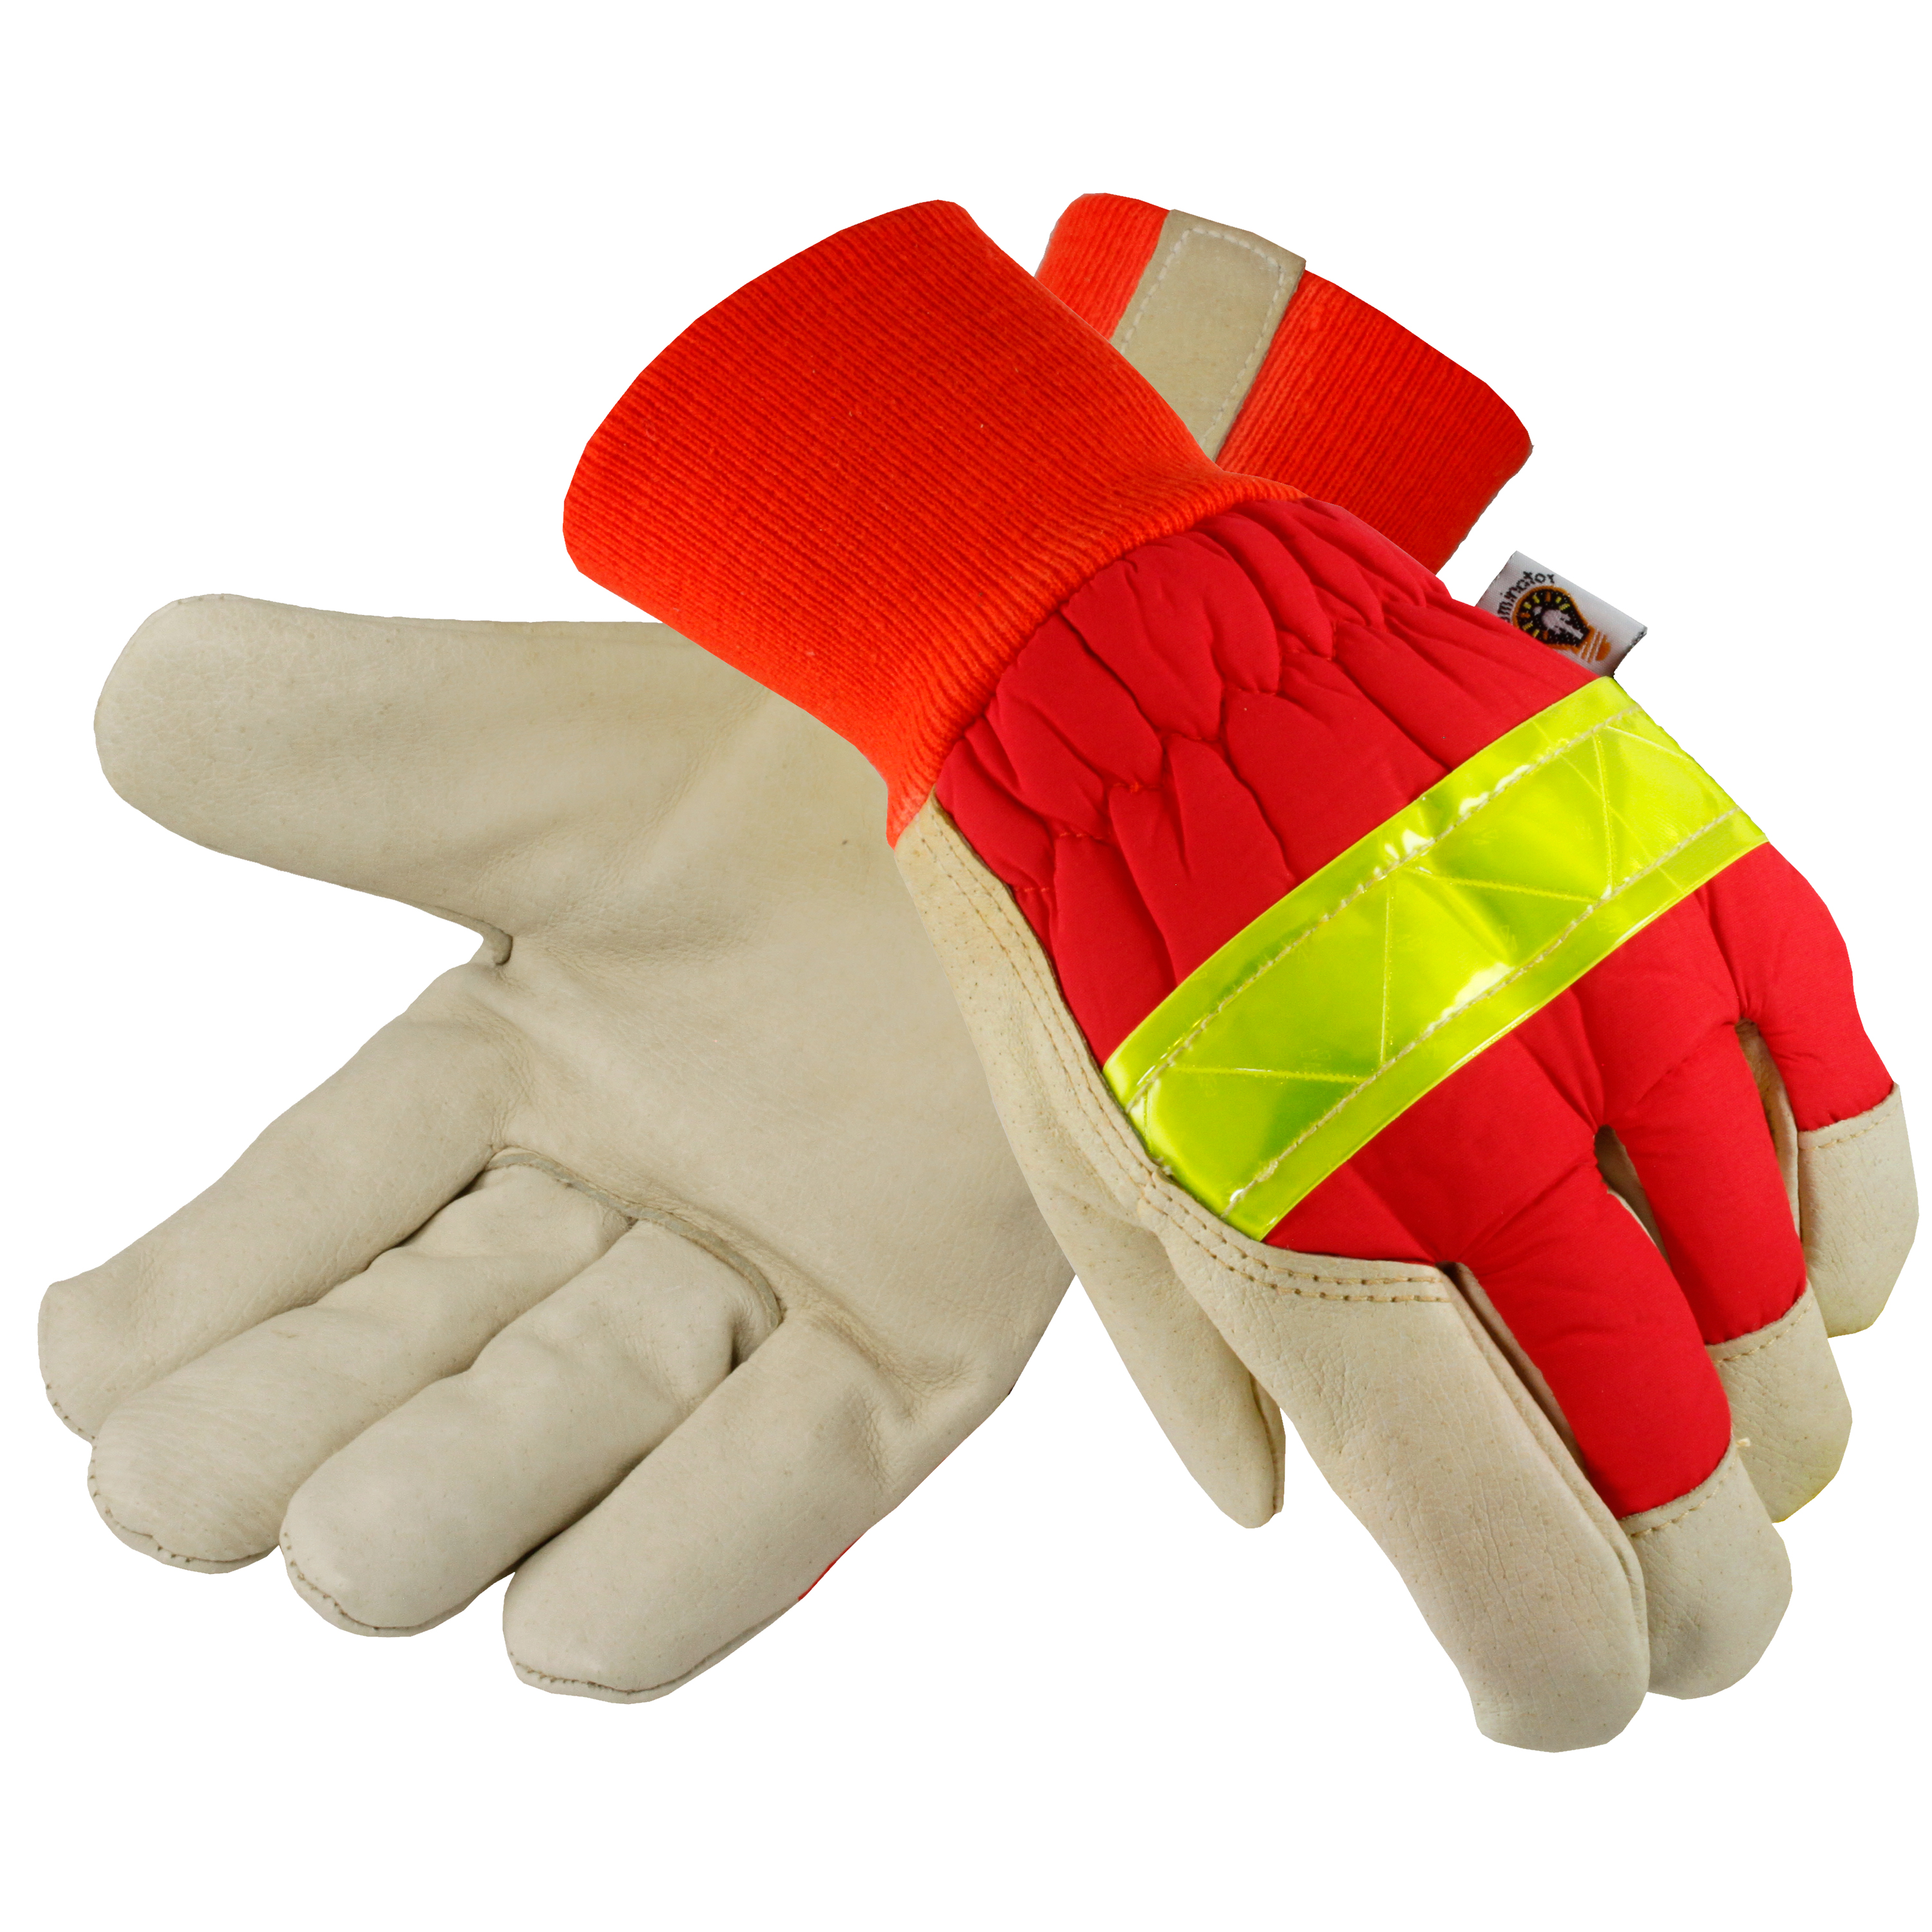 Insulated Reflective Gloves, Knit Wrist